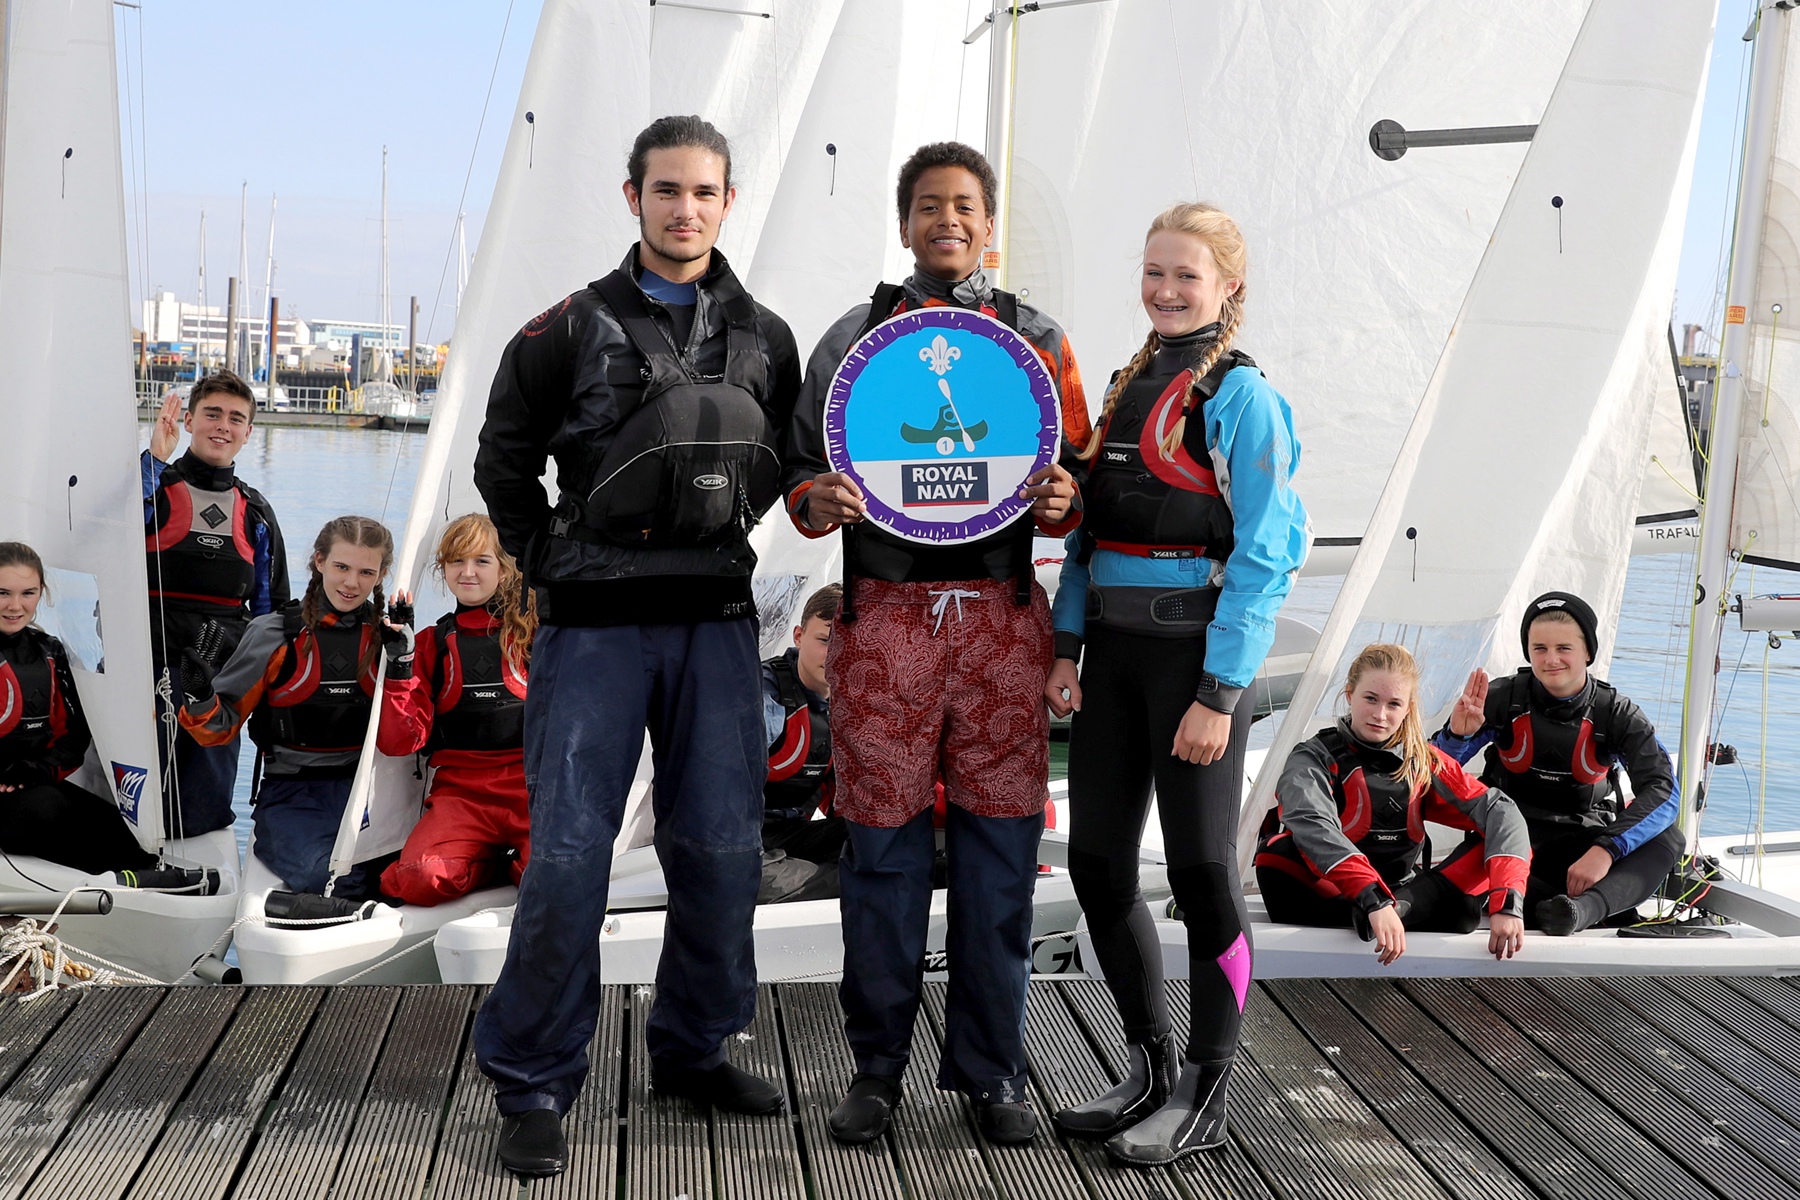 Three young people holding up a giant Time On Water badge who have just been awarded their badge, standing in front of a moored sail boat